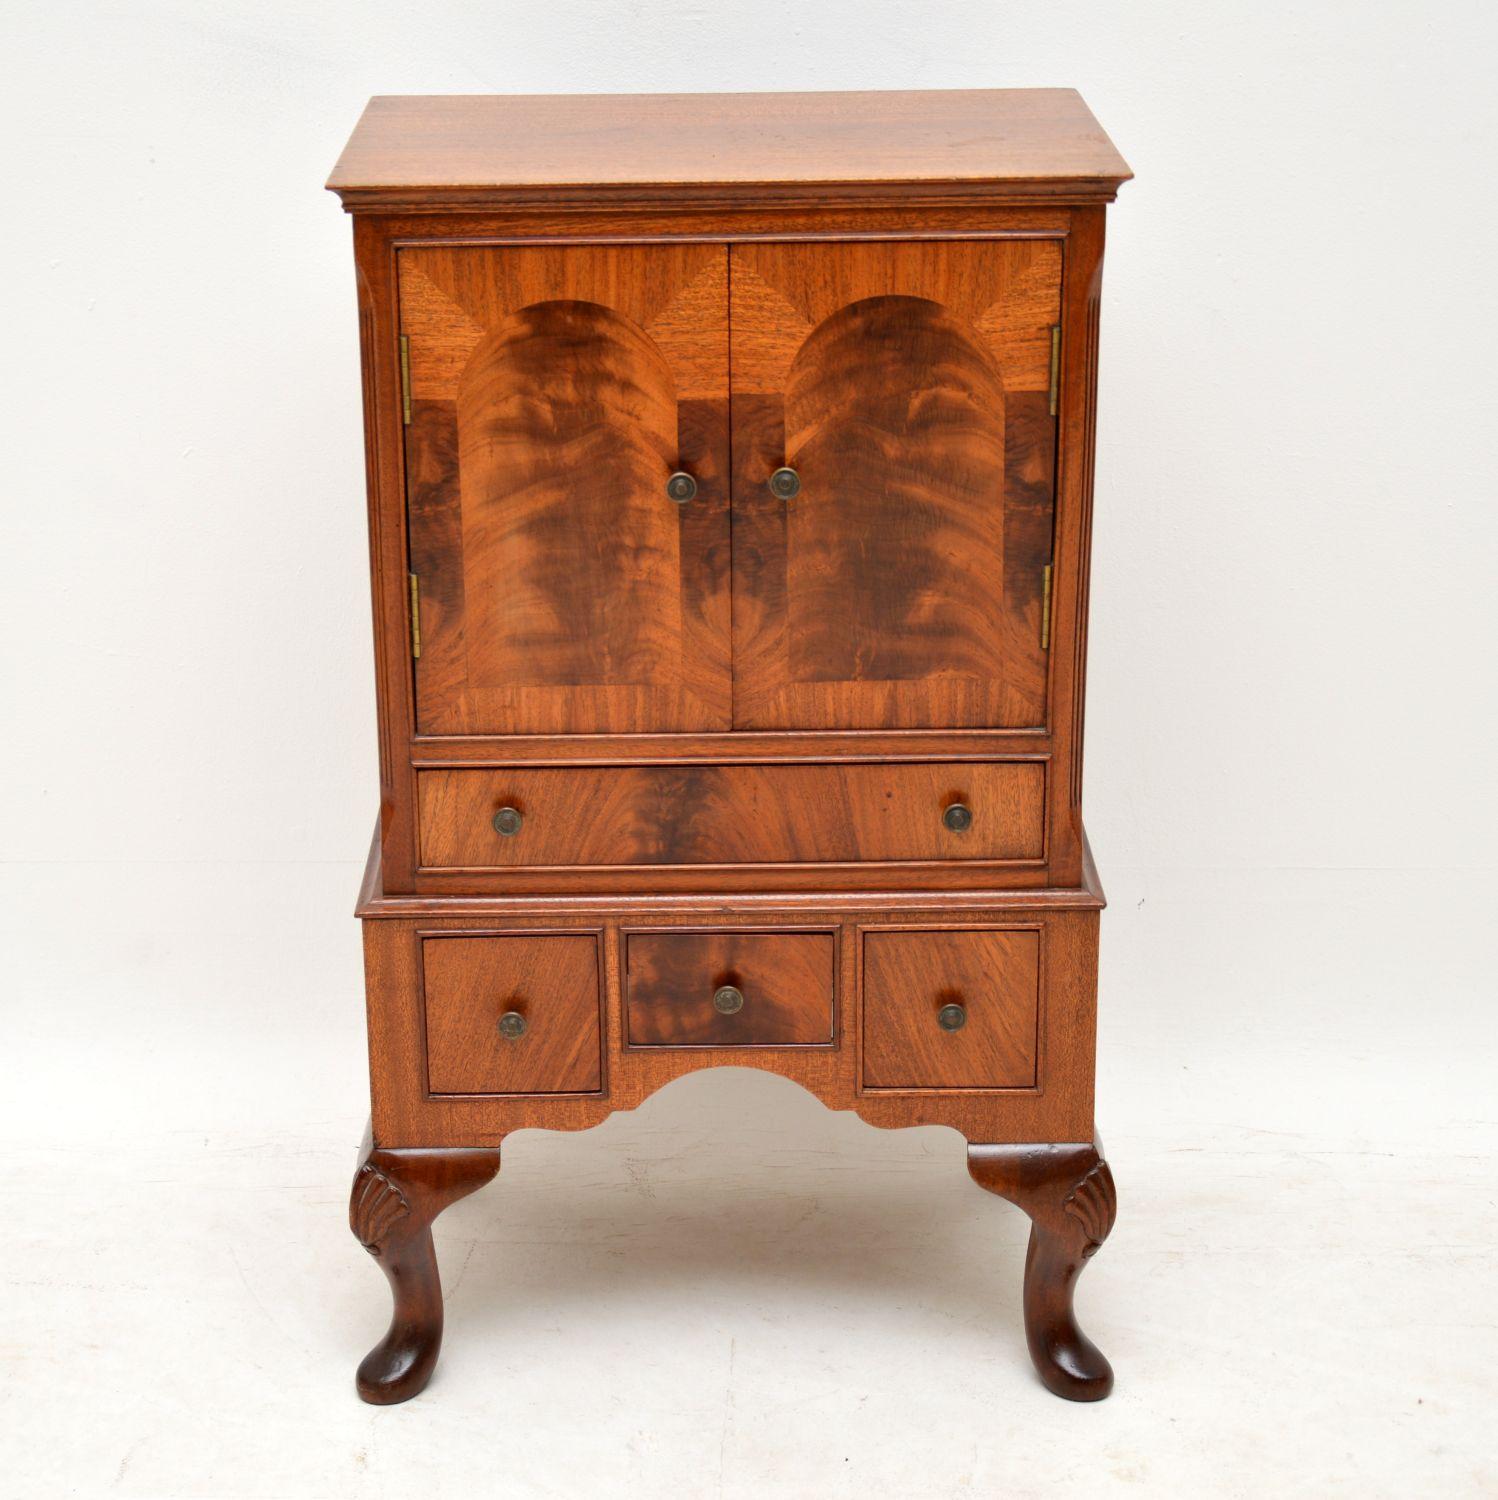 Small antique mahogany cupboard and chest of drawers combination in good condition and dating from around the 1920s-1930s period. This is a very useful small compact piece of furniture and could be used in many places the home. The two cupboard